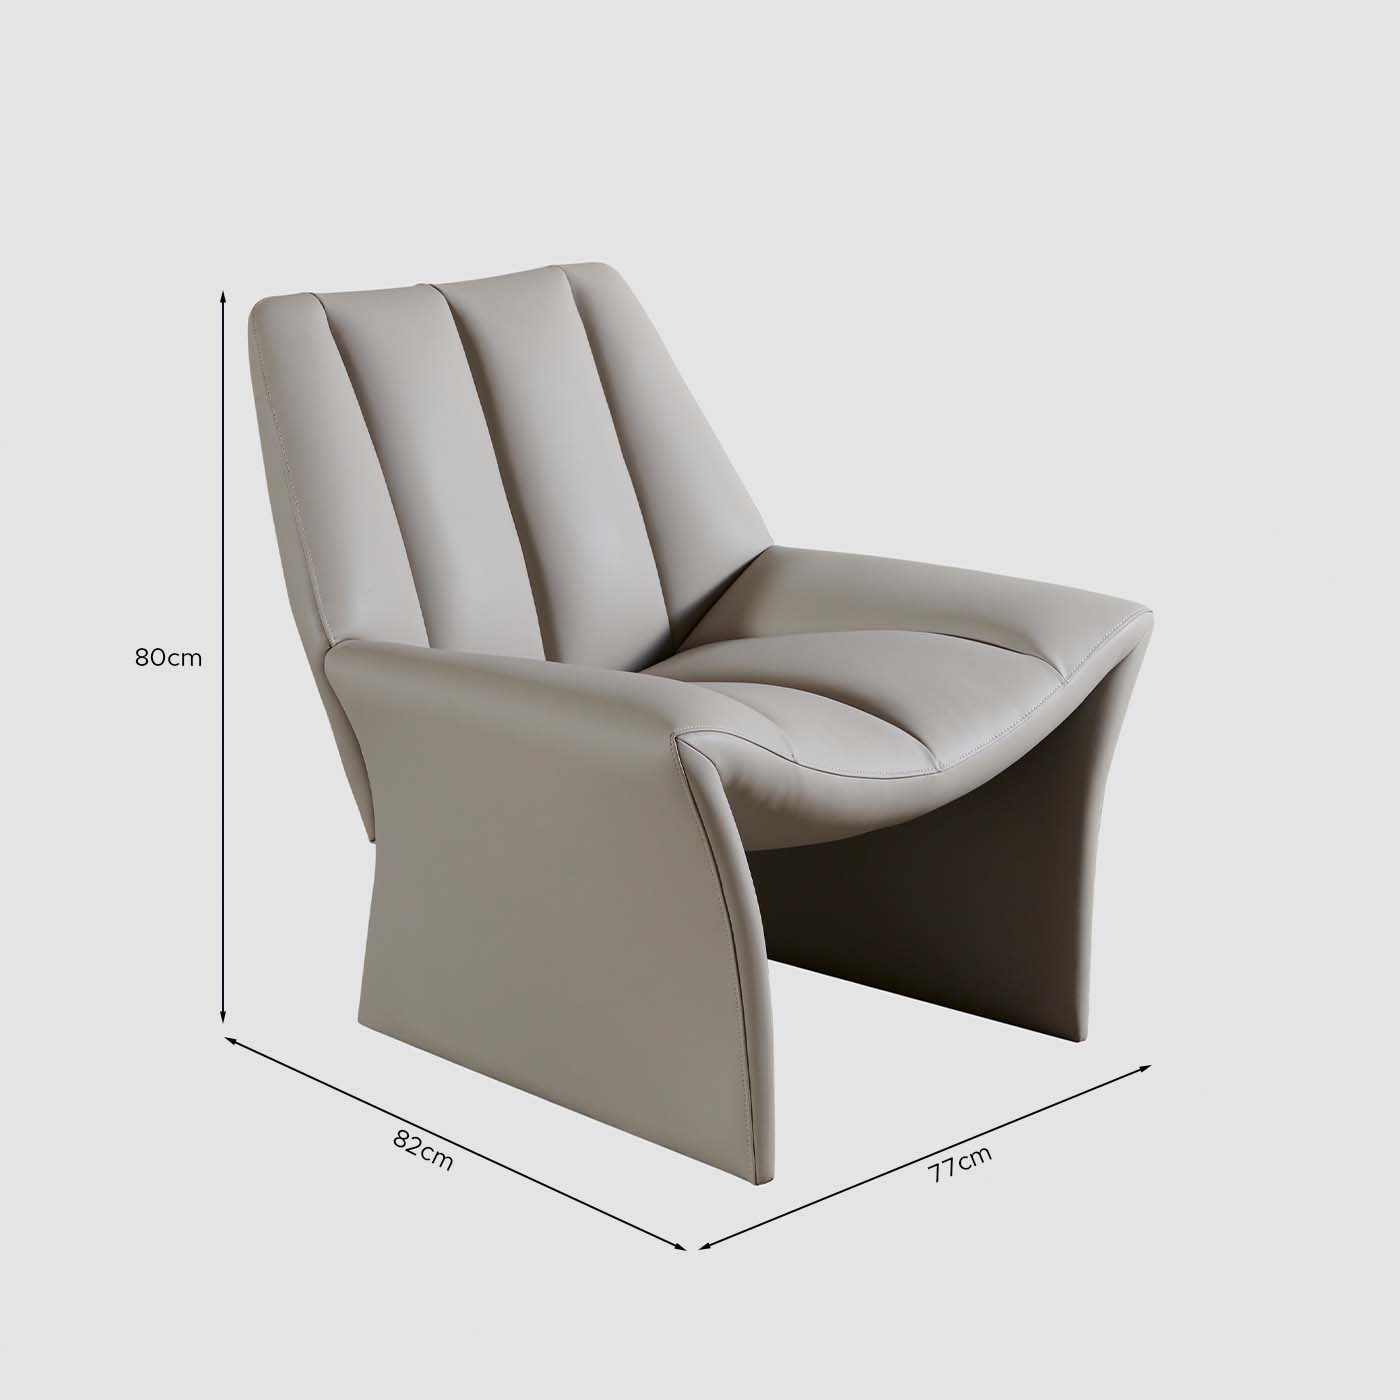 Teodoro leisure chair only Sofas